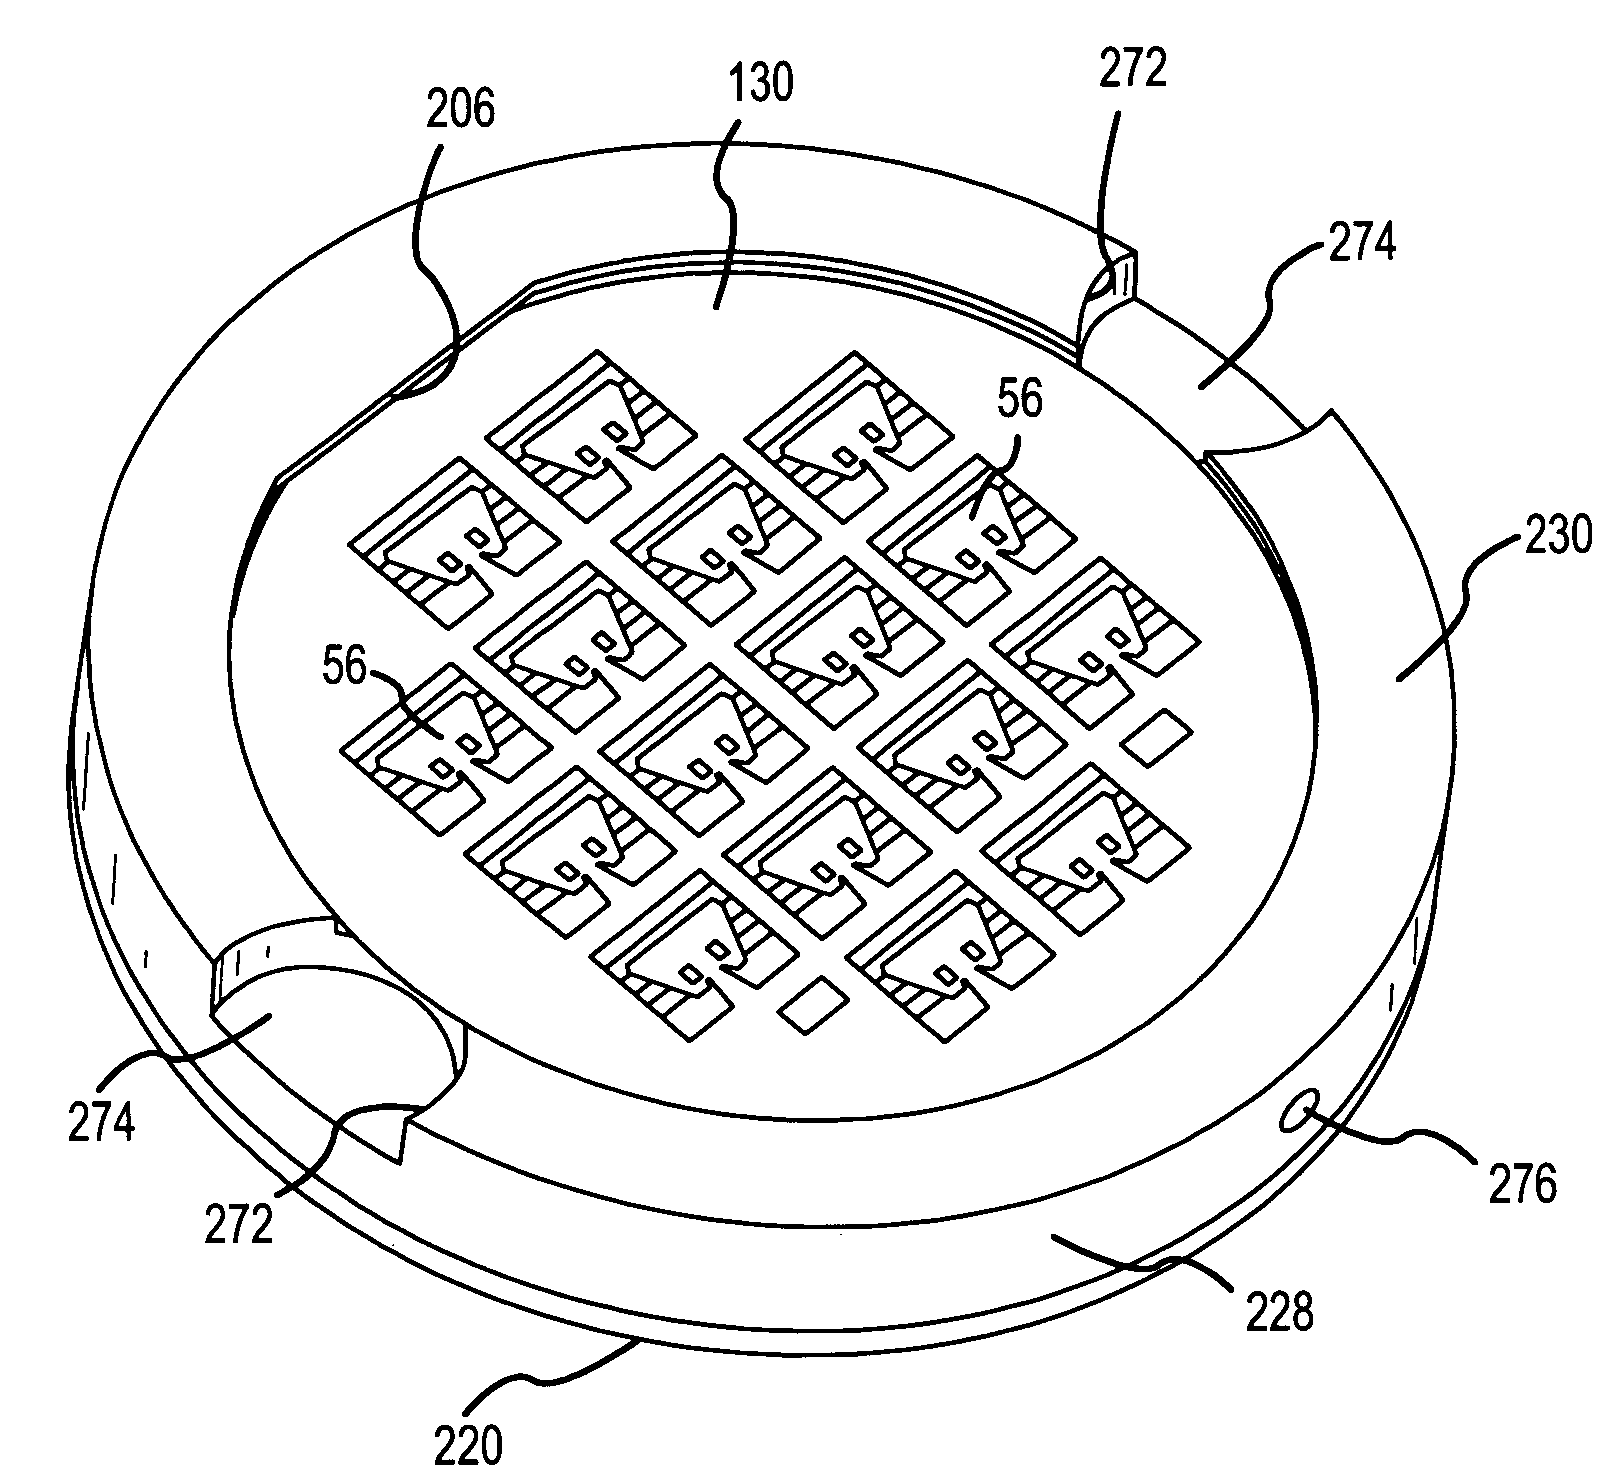 Multi-fixture assembly of cutting tools